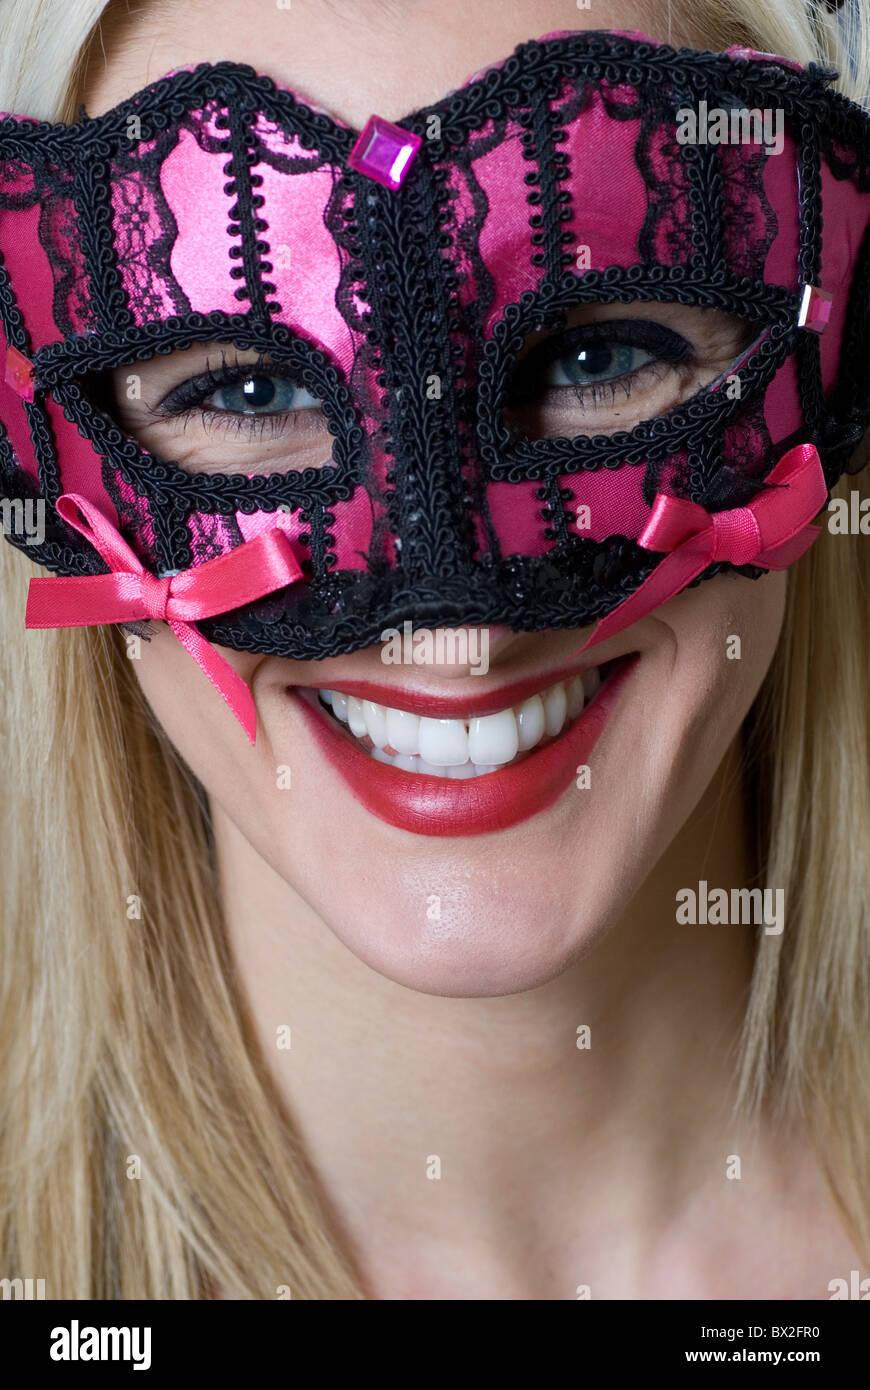 Young woman in pink party mask Banque D'Images